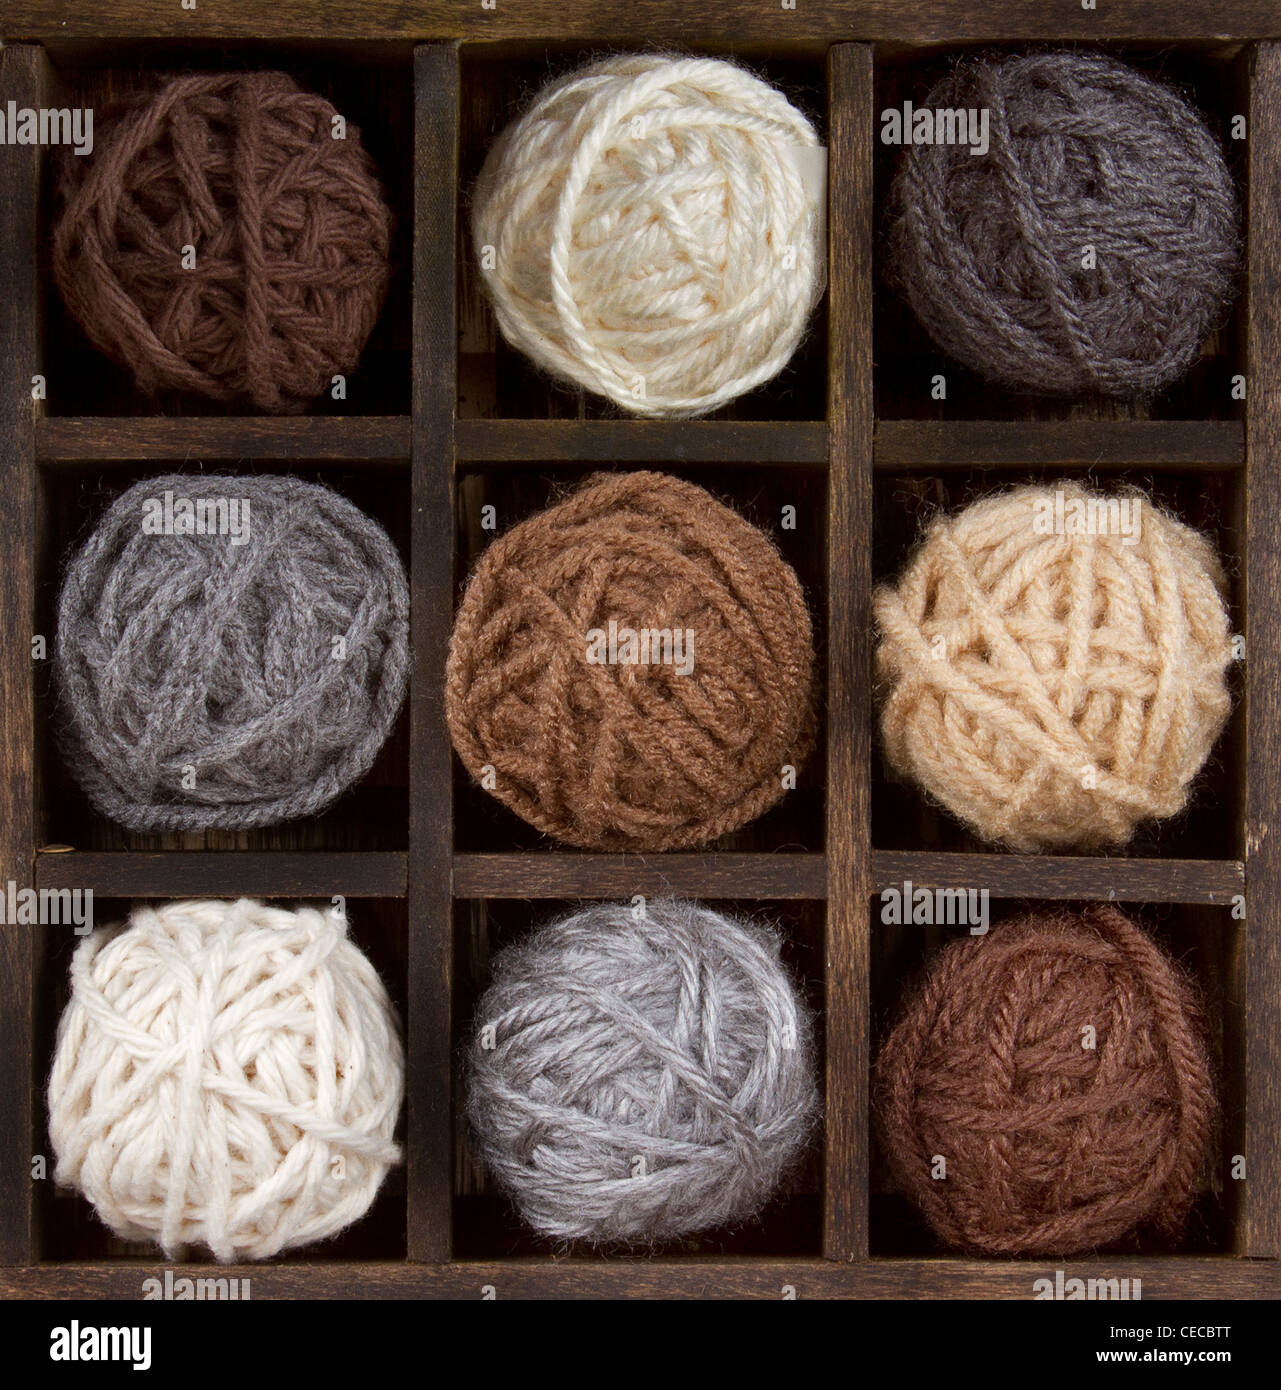 Assorted balls of natural colored yarn in a printers box Stock Photo